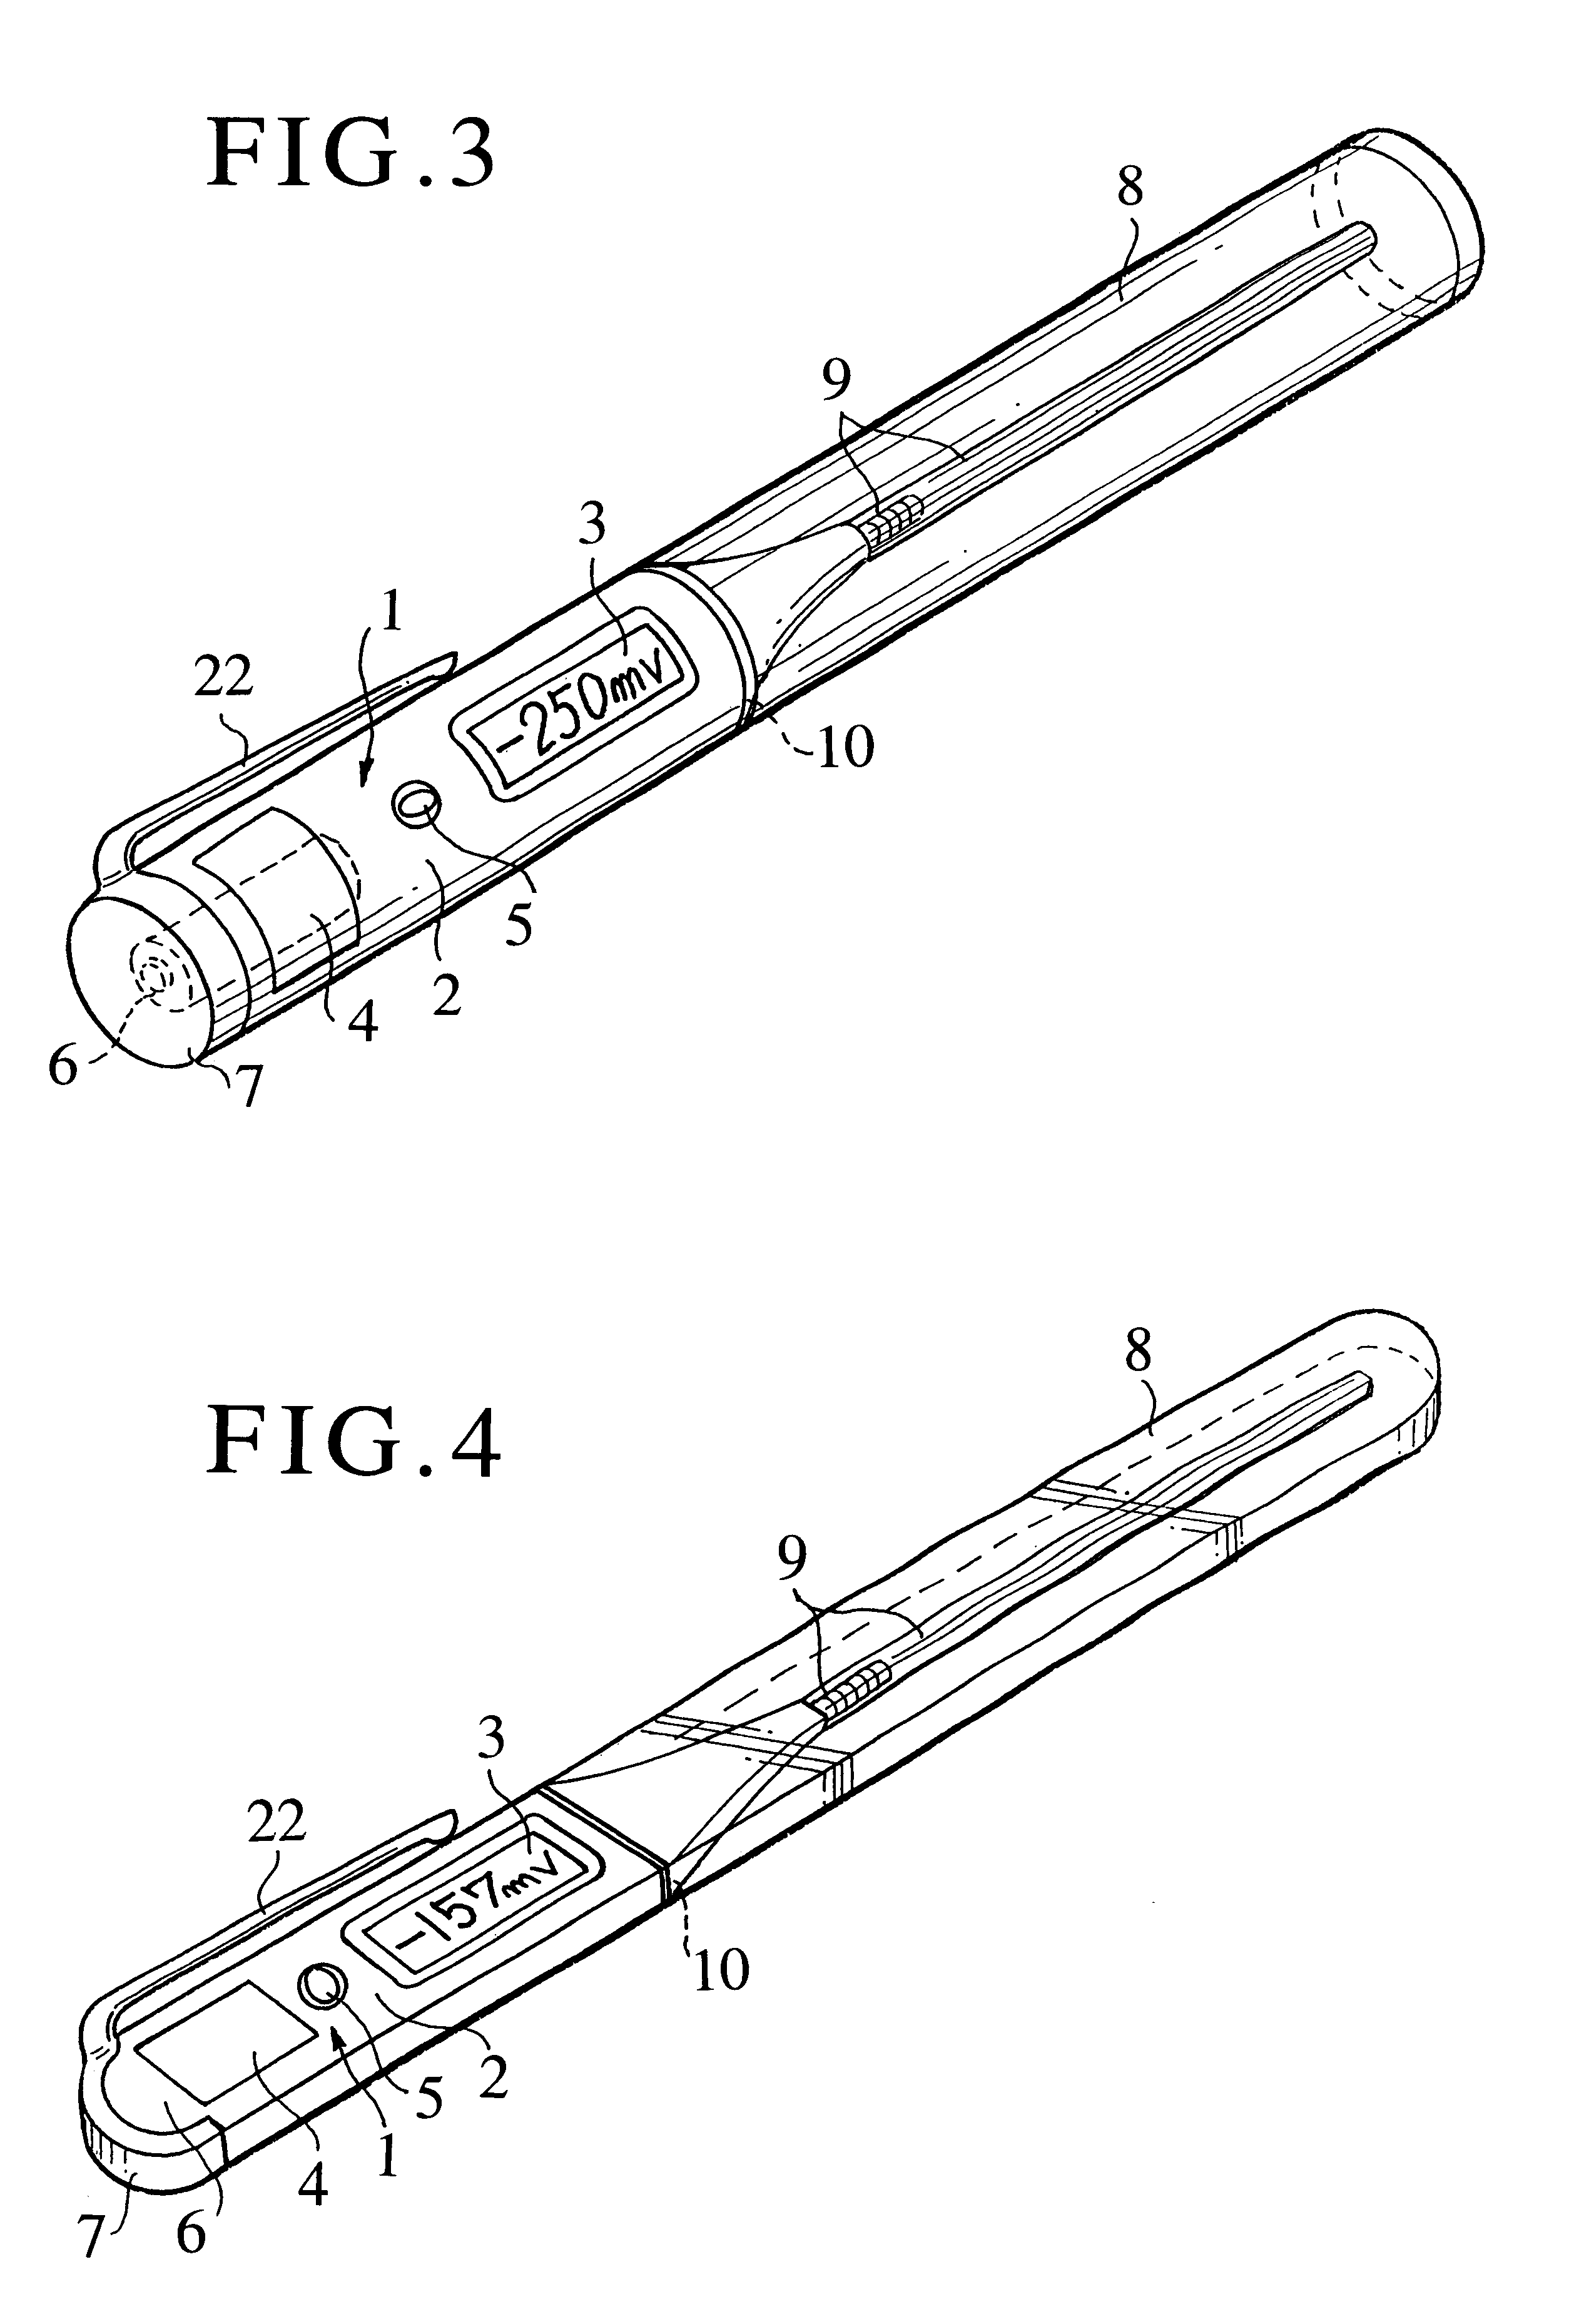 Health care instrument containing oxidation-reduction potential measuring function